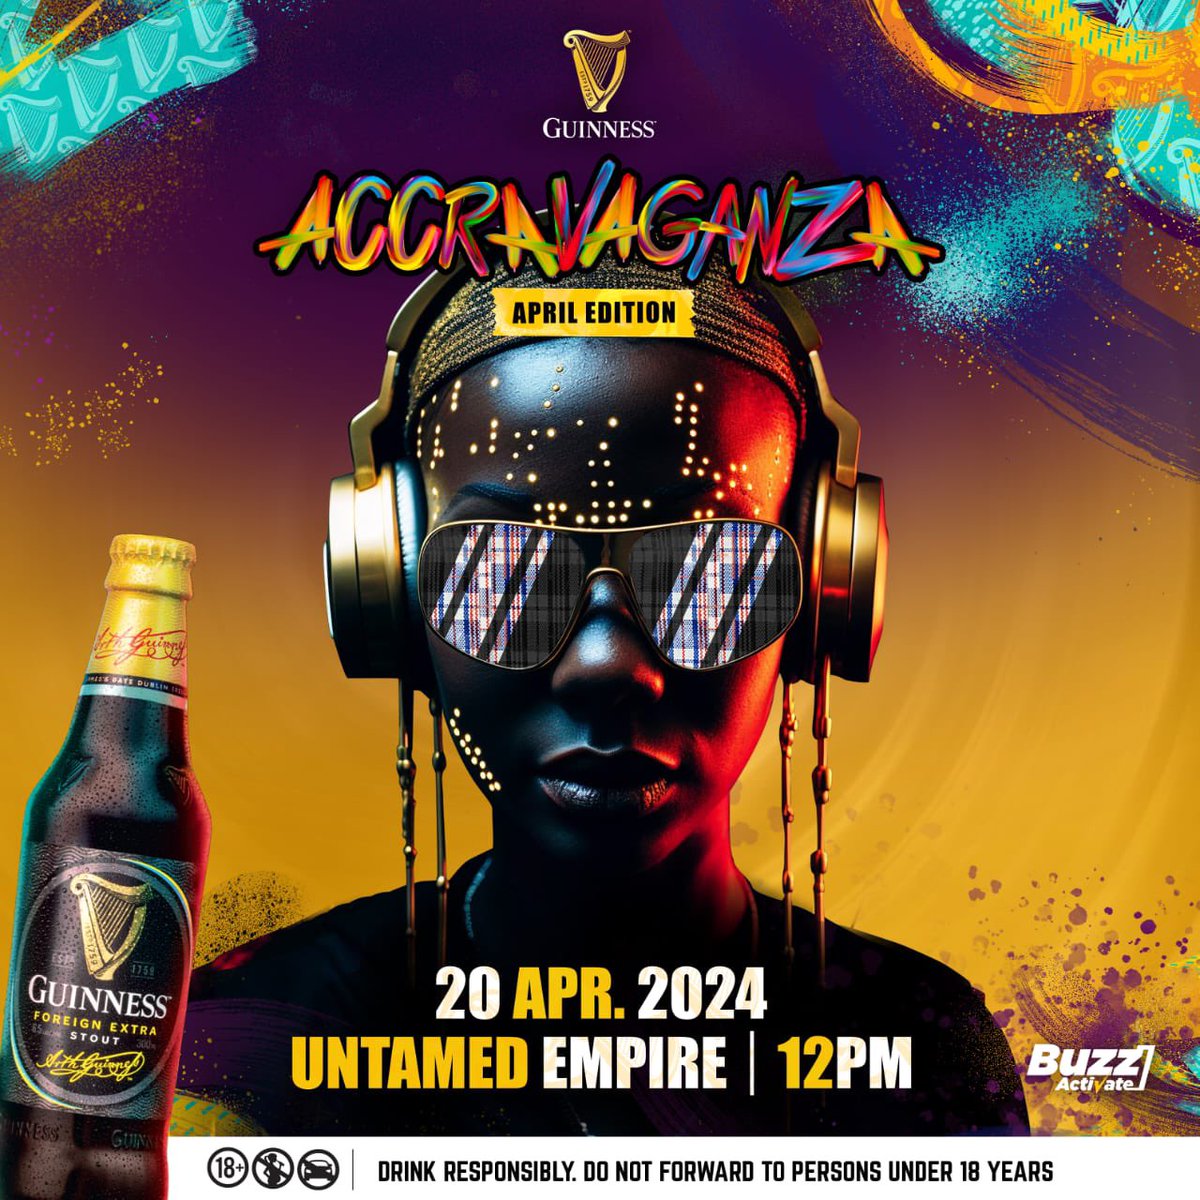 The Guinness Accravaganza is calling your name. Untamed Empire, today!

#GuinnessAccravaganza